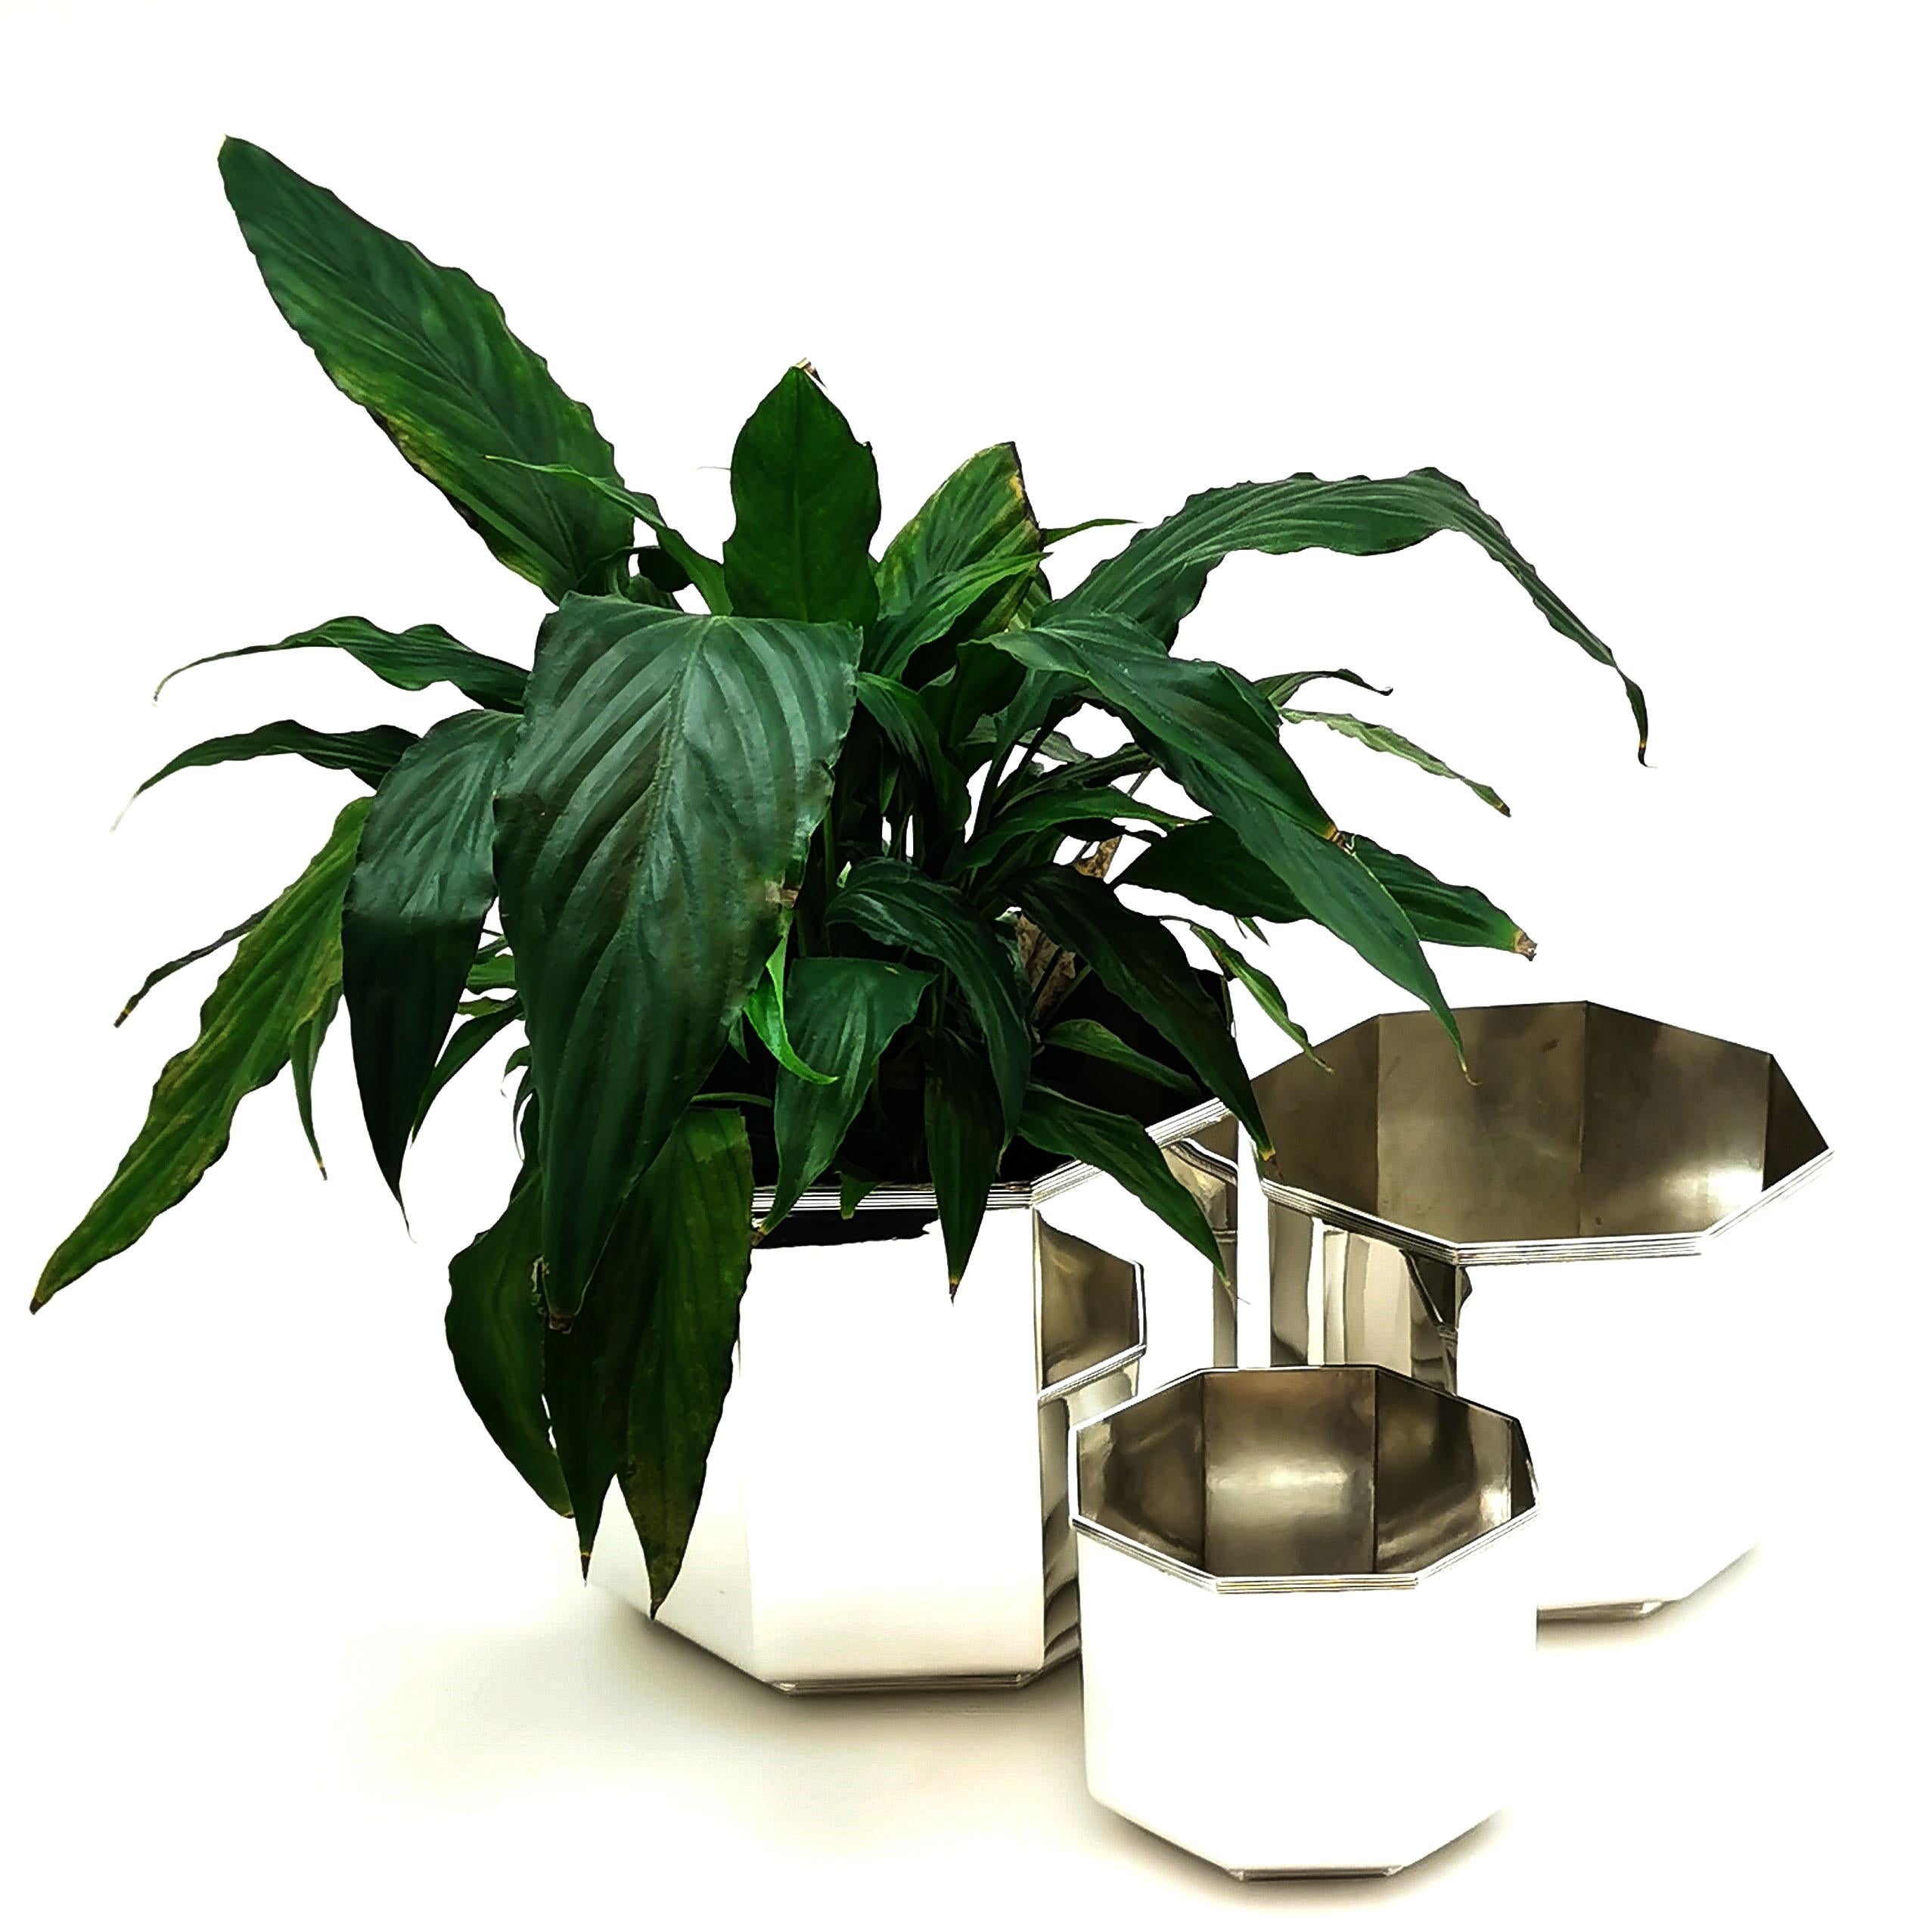 A magnificent Suite of 3 Modernist Italian solid silver octagonal pots - Perfect for a multiple of uses. These are suitable as a set of Coolers for wine & Champagne with a smaller Ice Bucket, as well as working for plants or flowers. These elegant